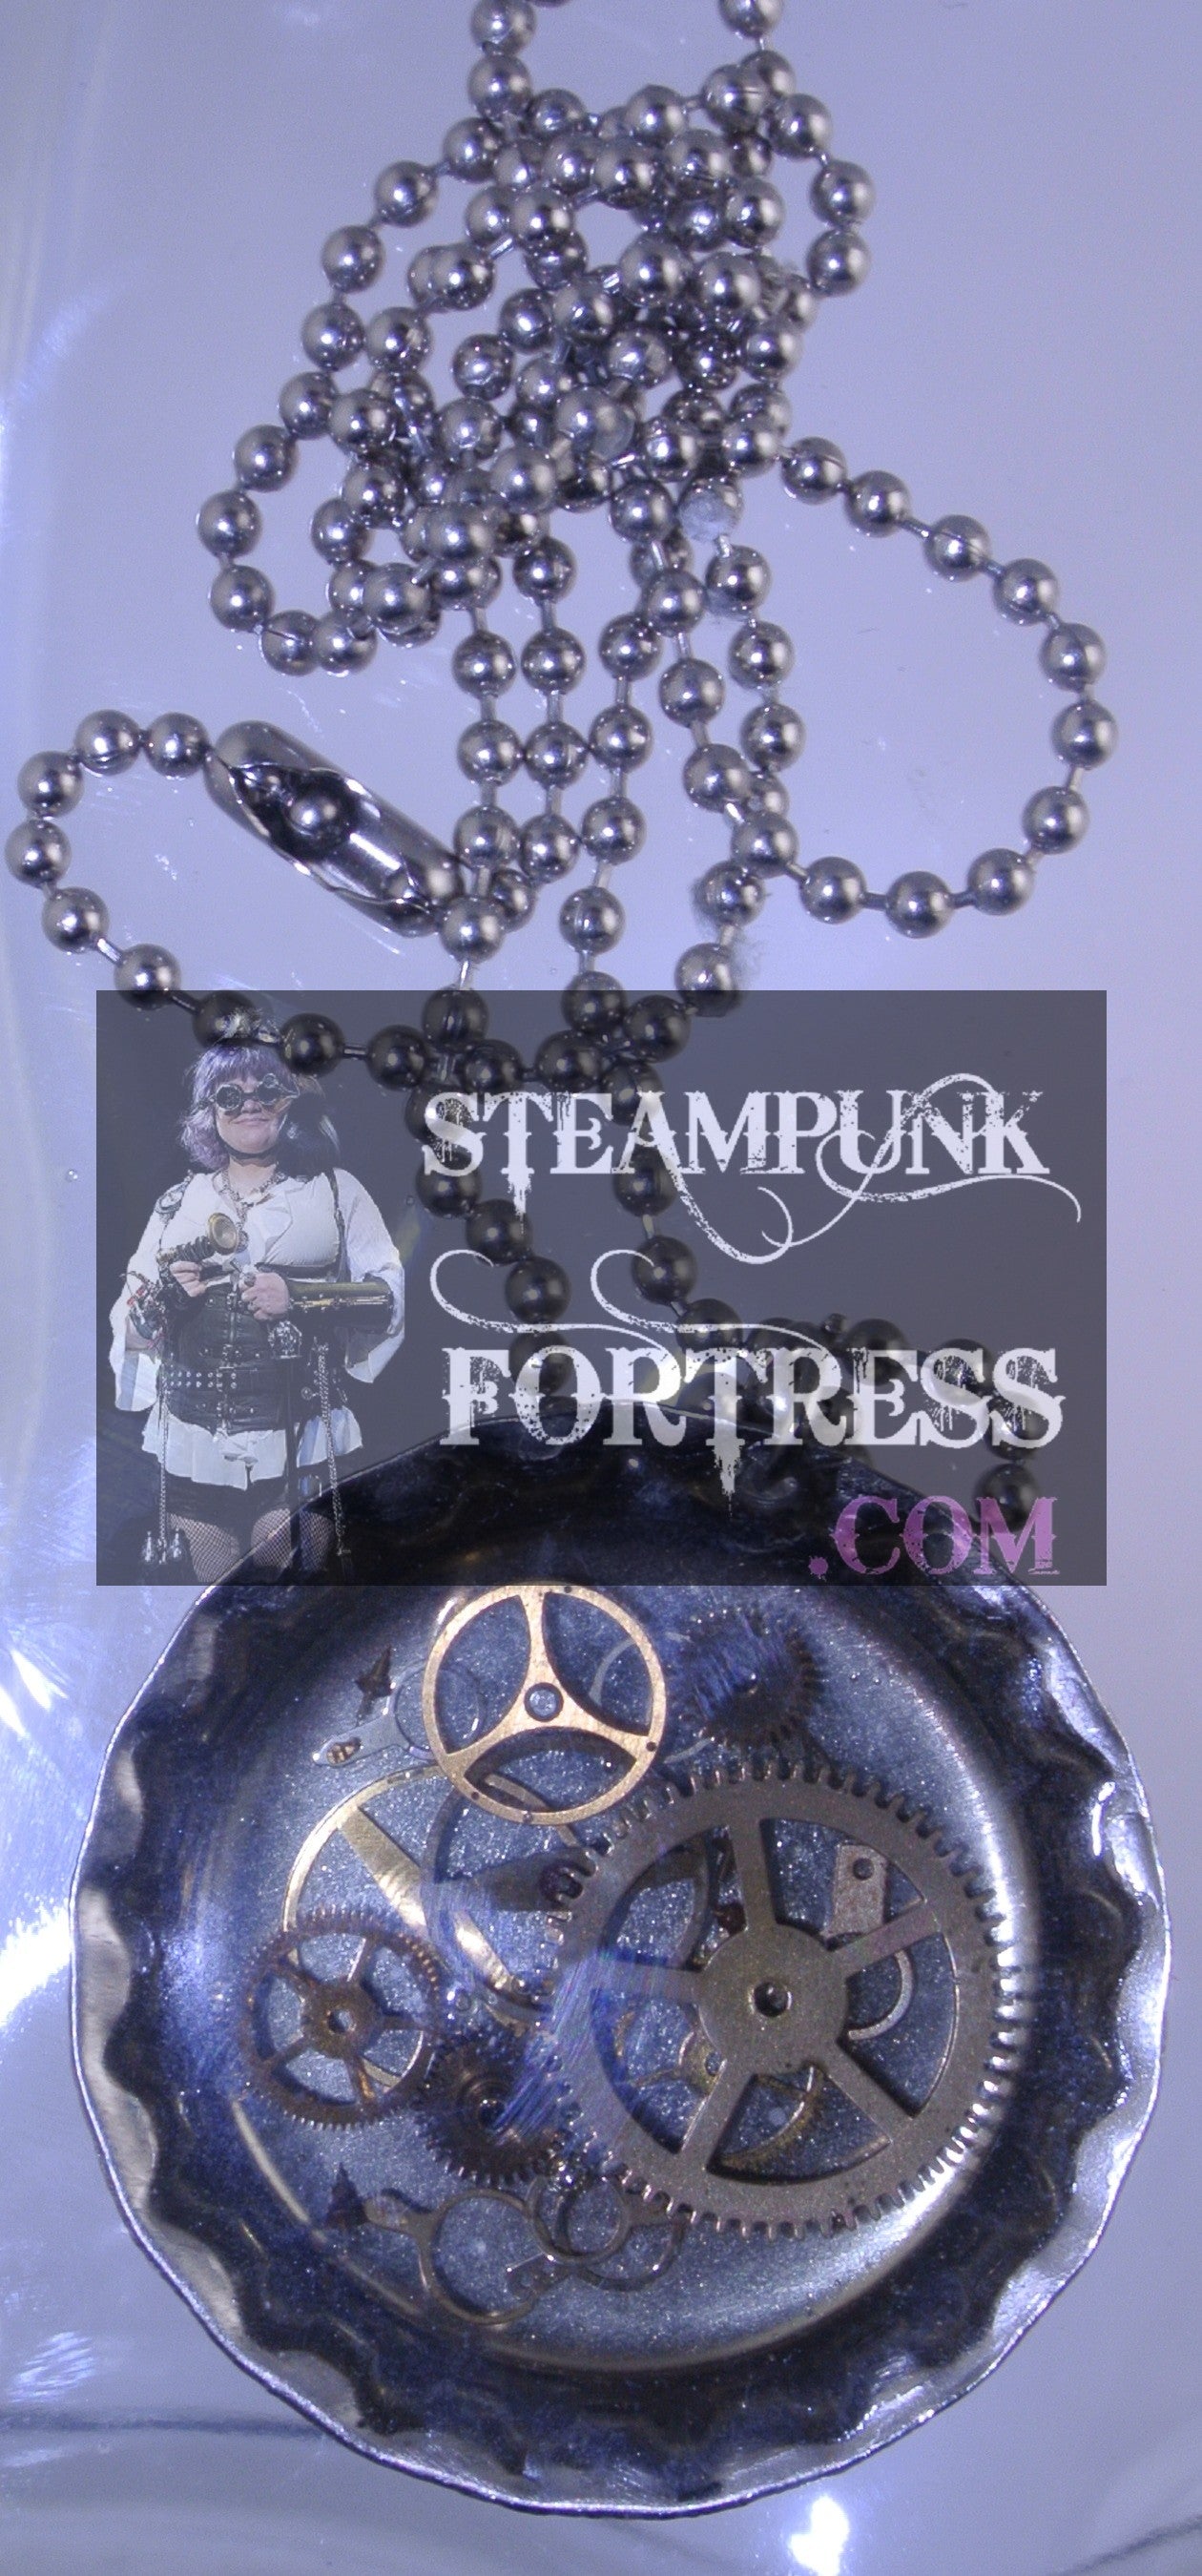 SILVER BOTTLECAP #1 GOLD AUTHENTIC GENUINE WATCH CLOCK GEARS NECKLACE STARR WILDE STEAMPUNK FORTRESS